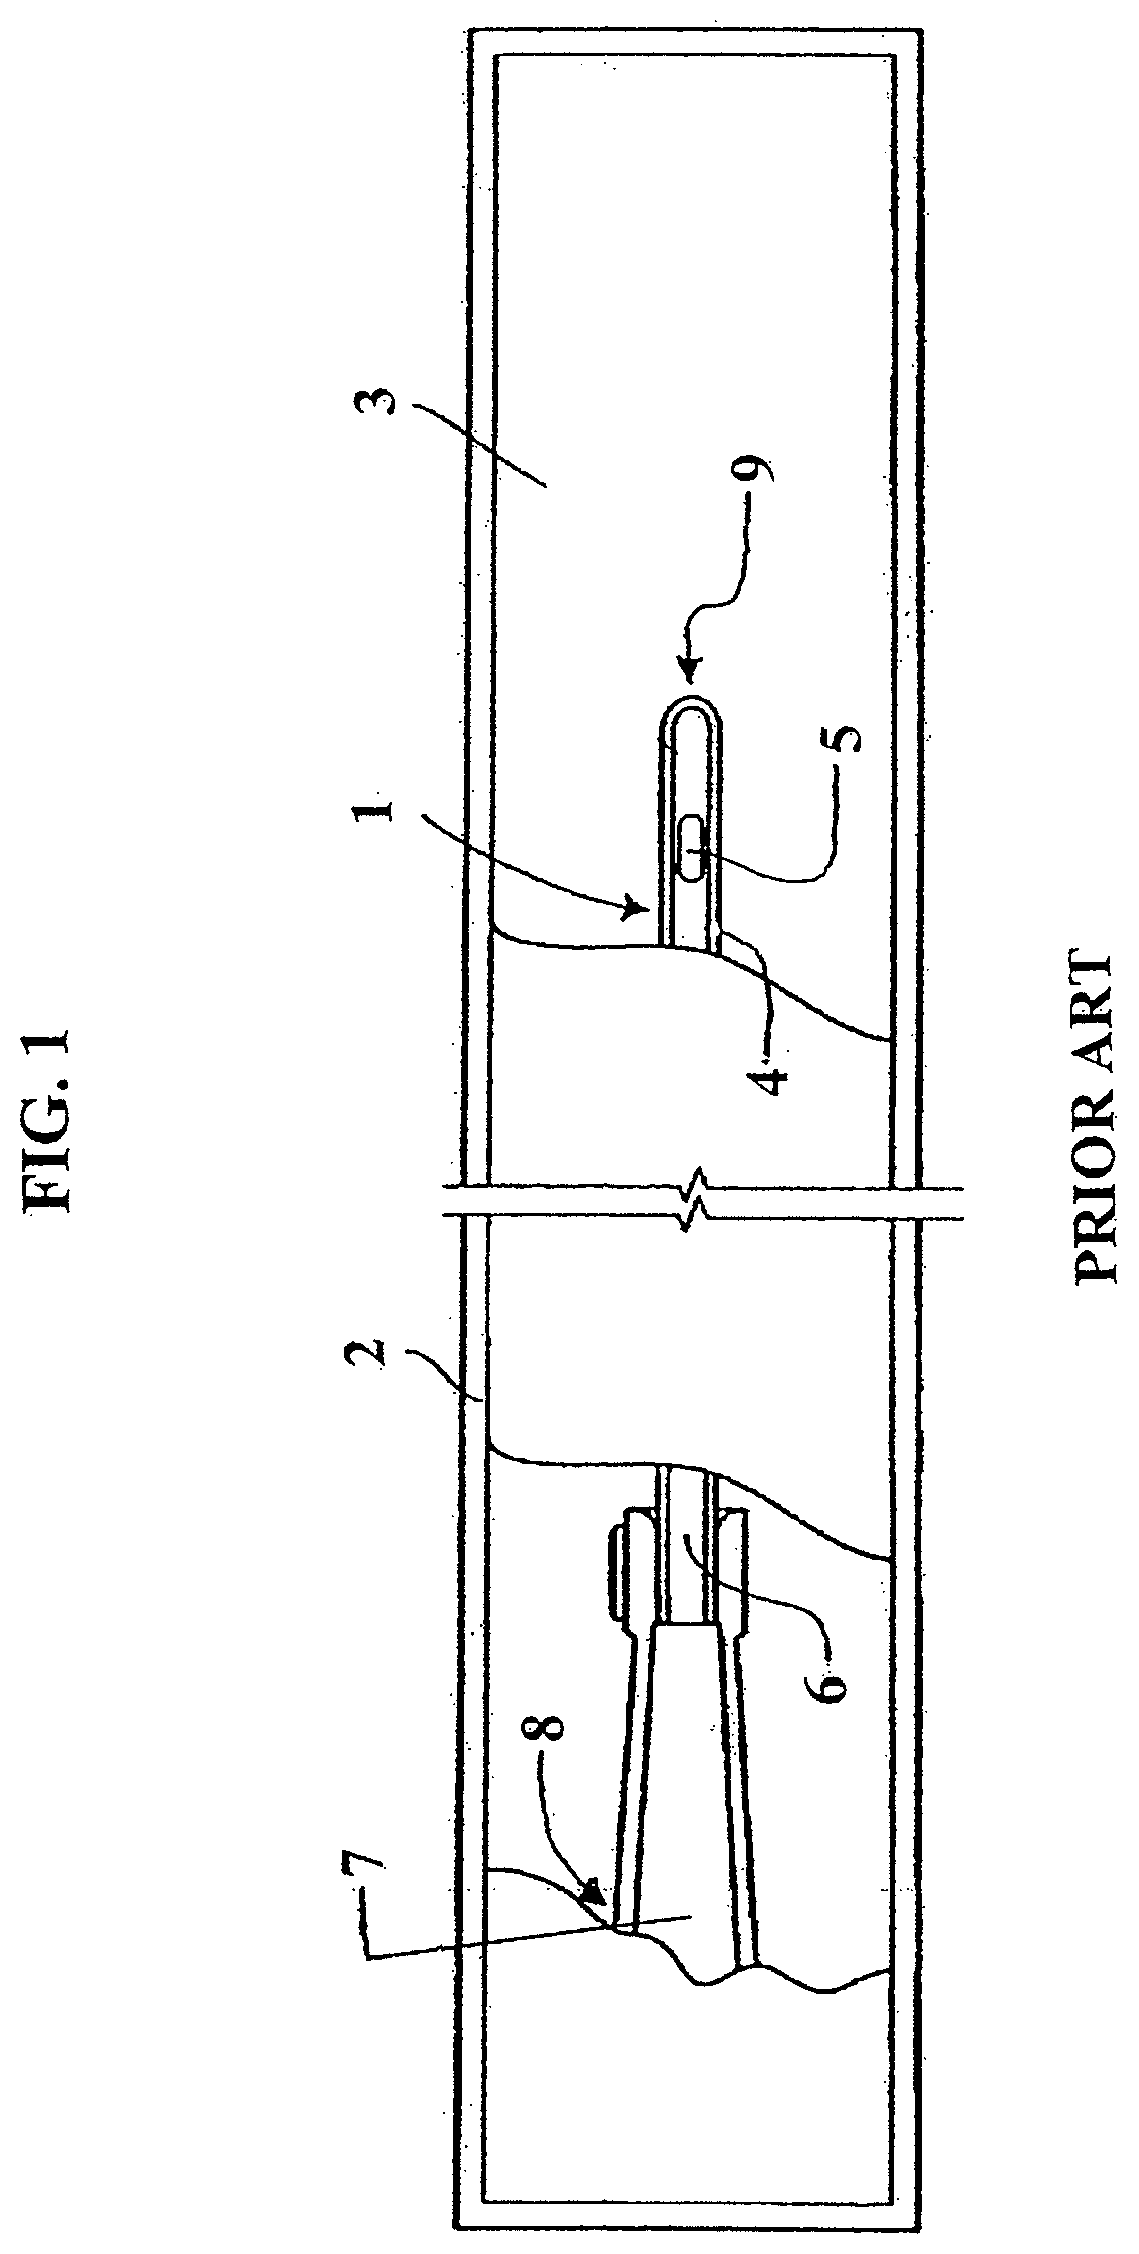 Catheter assembly/package utilizing a hydrating/hydrogel sleeve and method of making and using the same